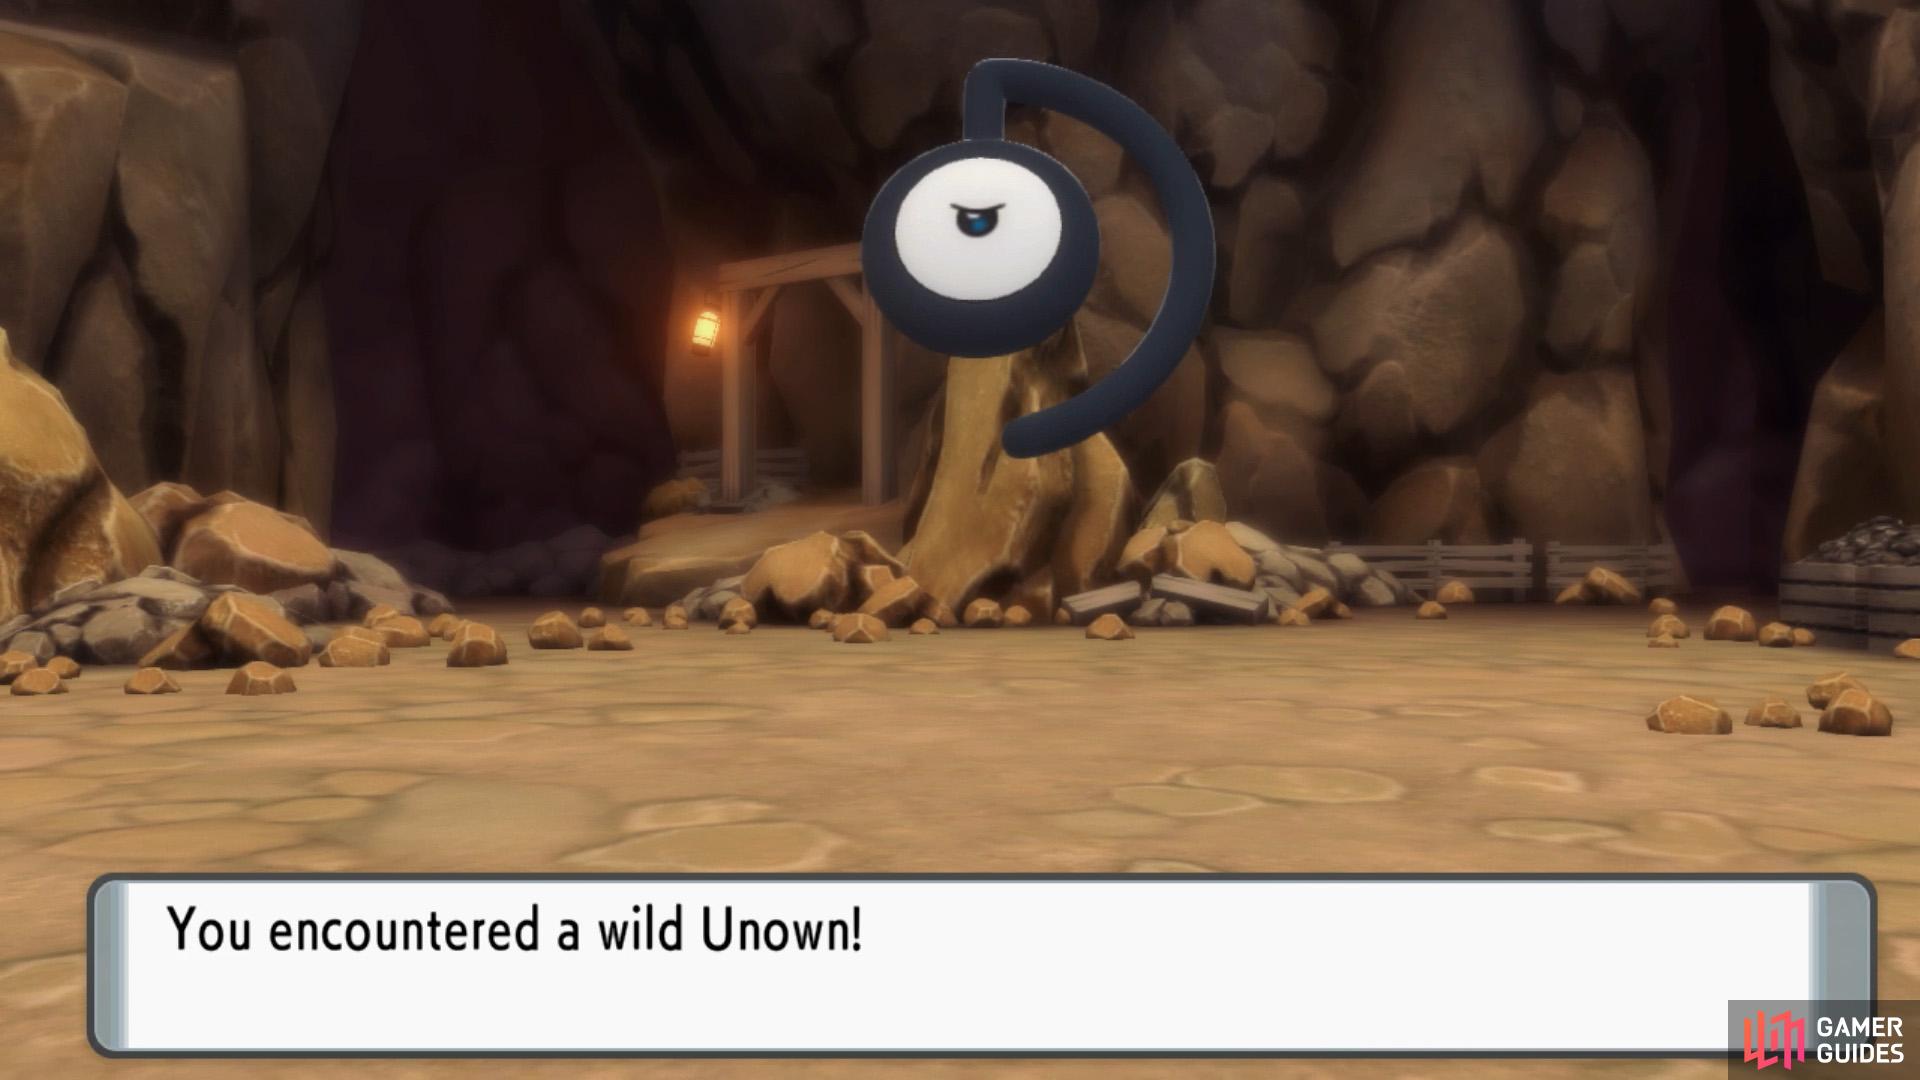 Unown D is found in the final large room with the Mind Plate.